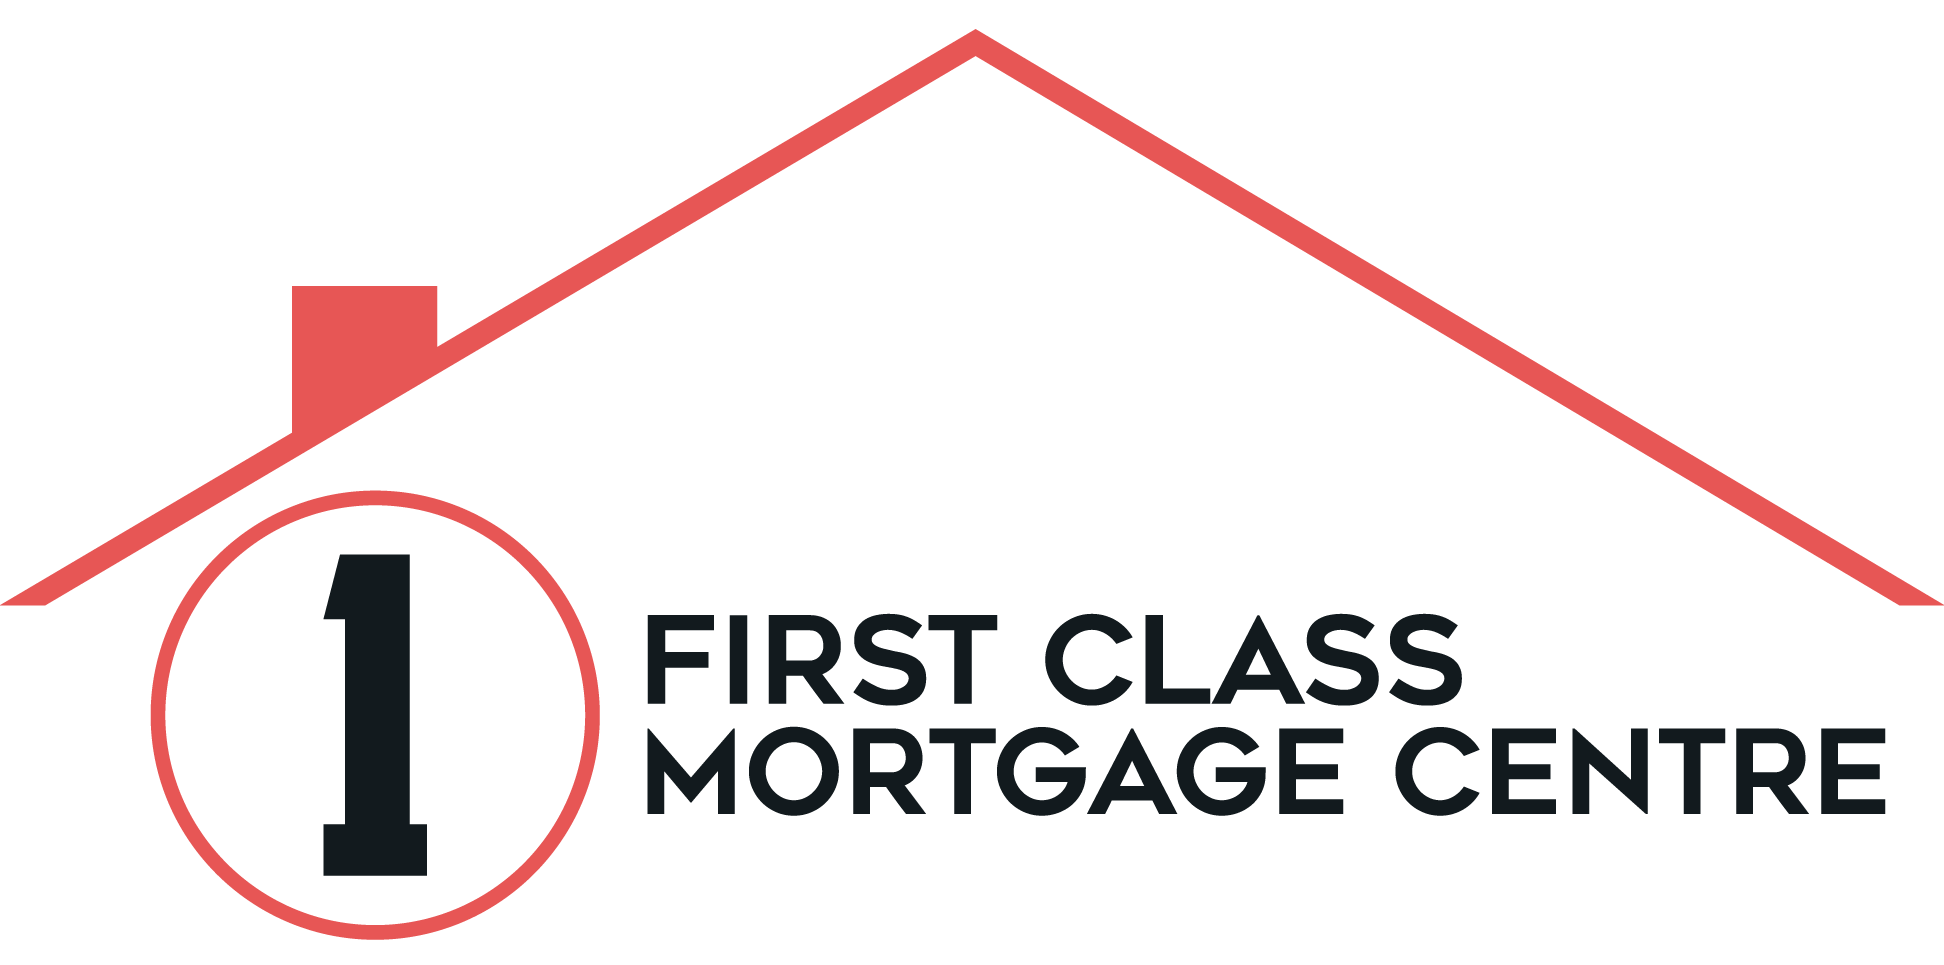 FIRST CLASS MORTGAGE CENTRE